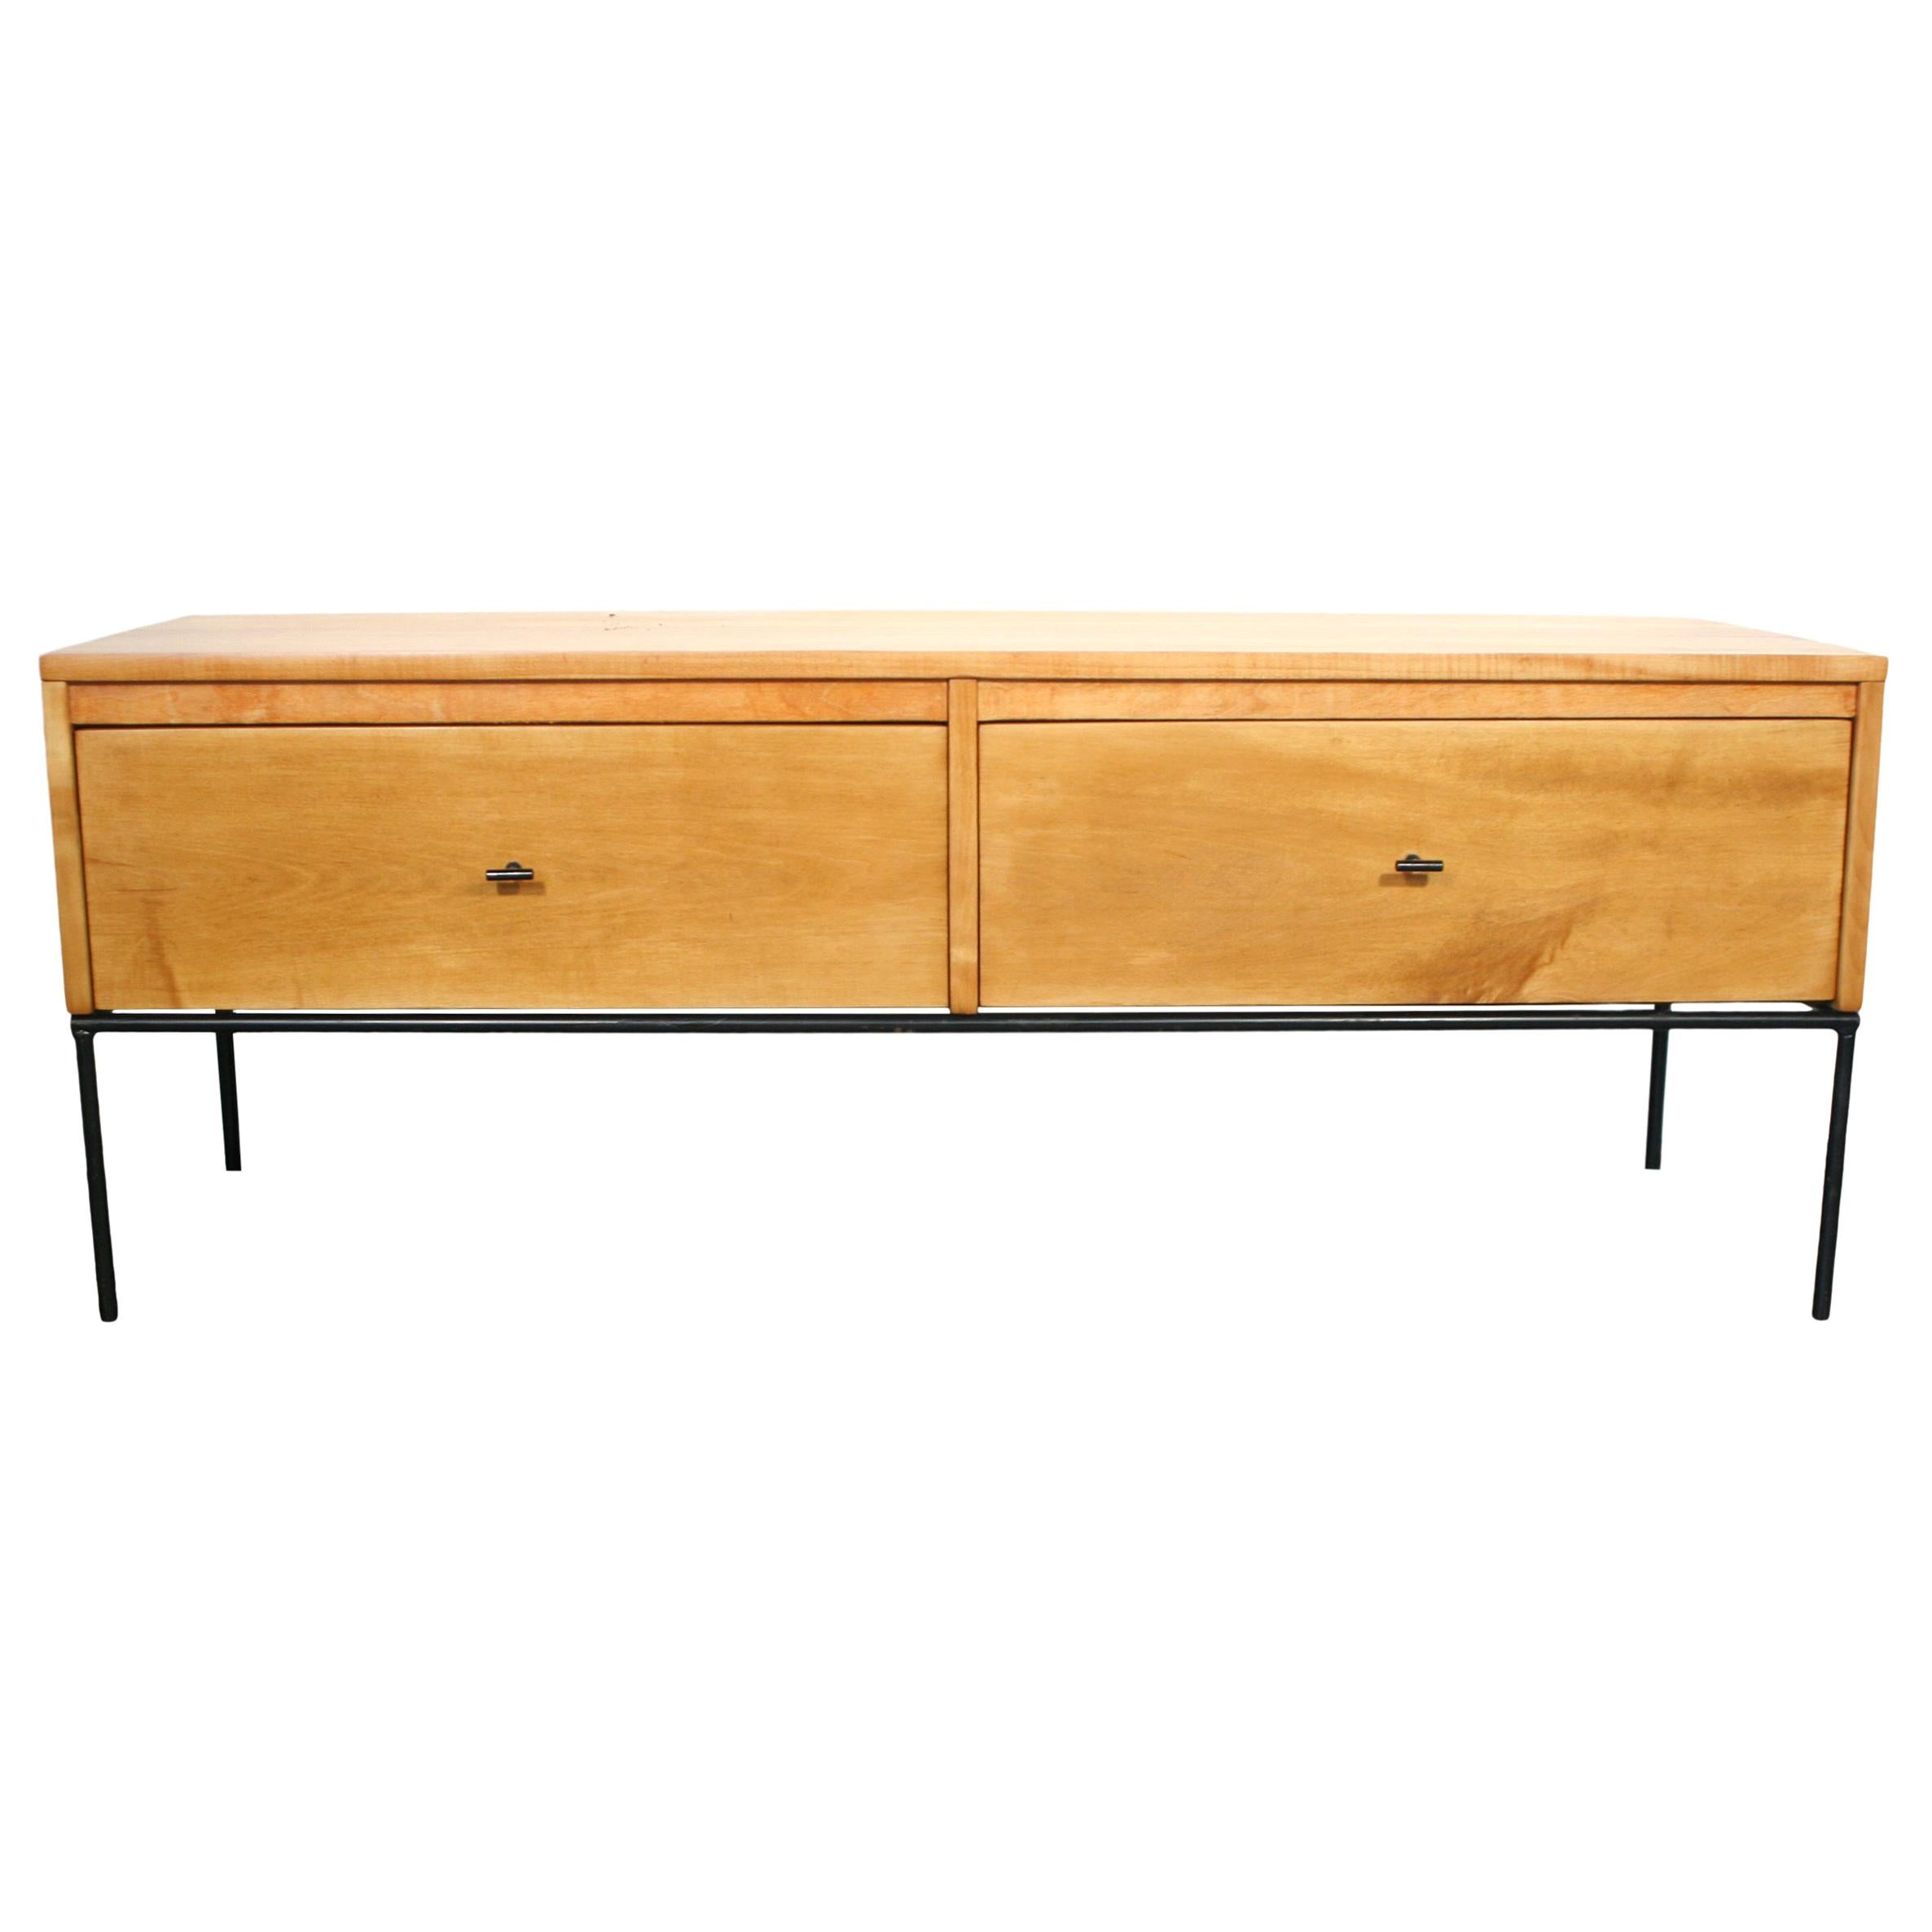 Unique Midcentury Low Two-Drawer Dresser by Paul McCobb Planner Group Blonde